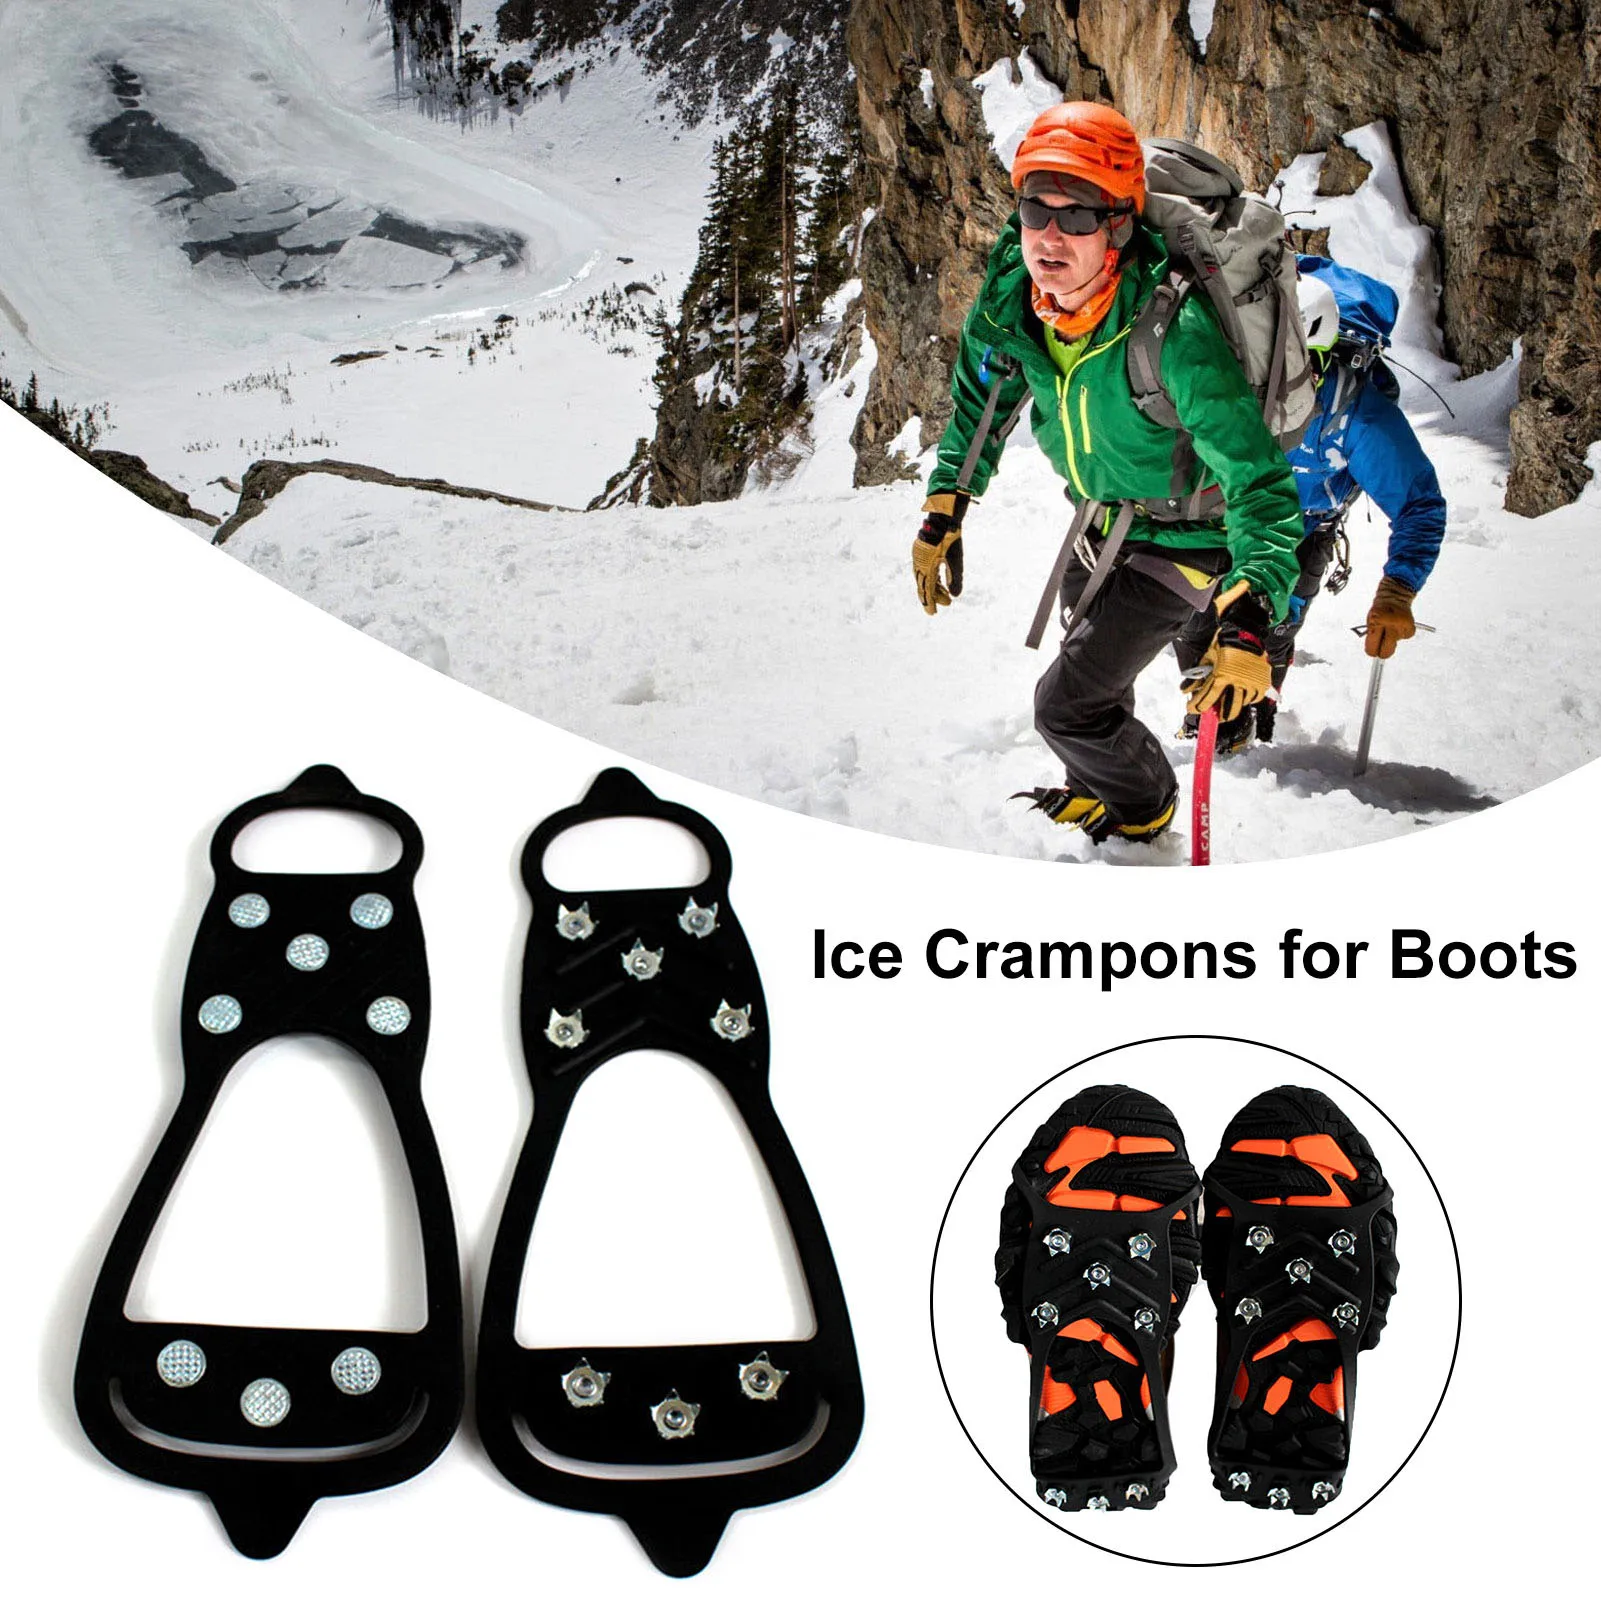 

Shoe Ice Cleats Walk Traction Cleats 8 Spikes Crampons For Boots Winter Outdoor Anti-Skid Ice Climbing Shoe Spikes Ice Grips